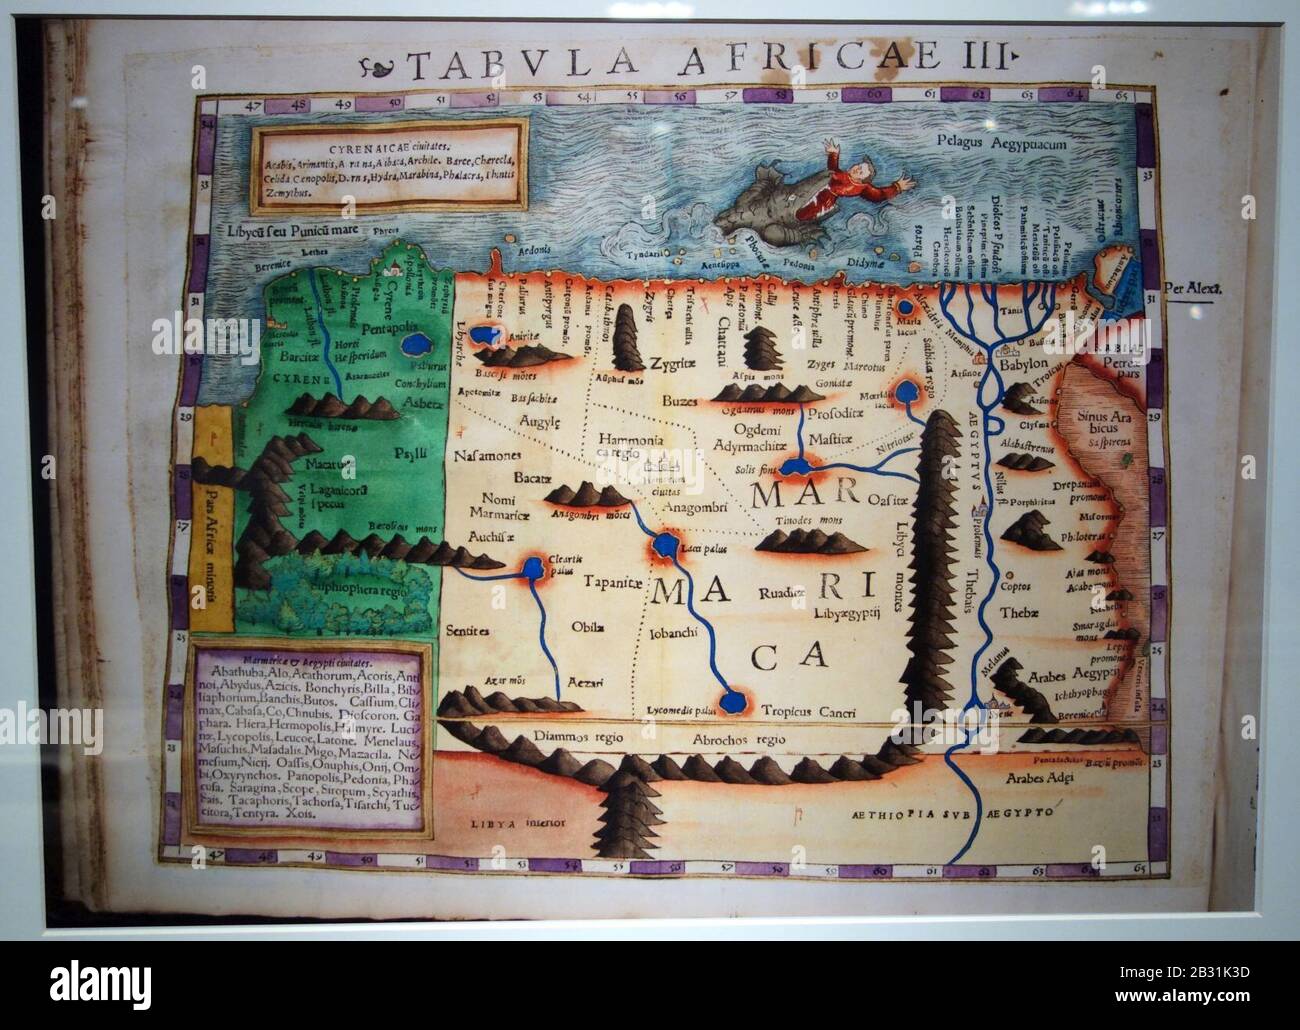 Geographia by Ptolemy, Aphricae Tabula III, 1540 Basel edition - Maps of Africa - Stock Photo